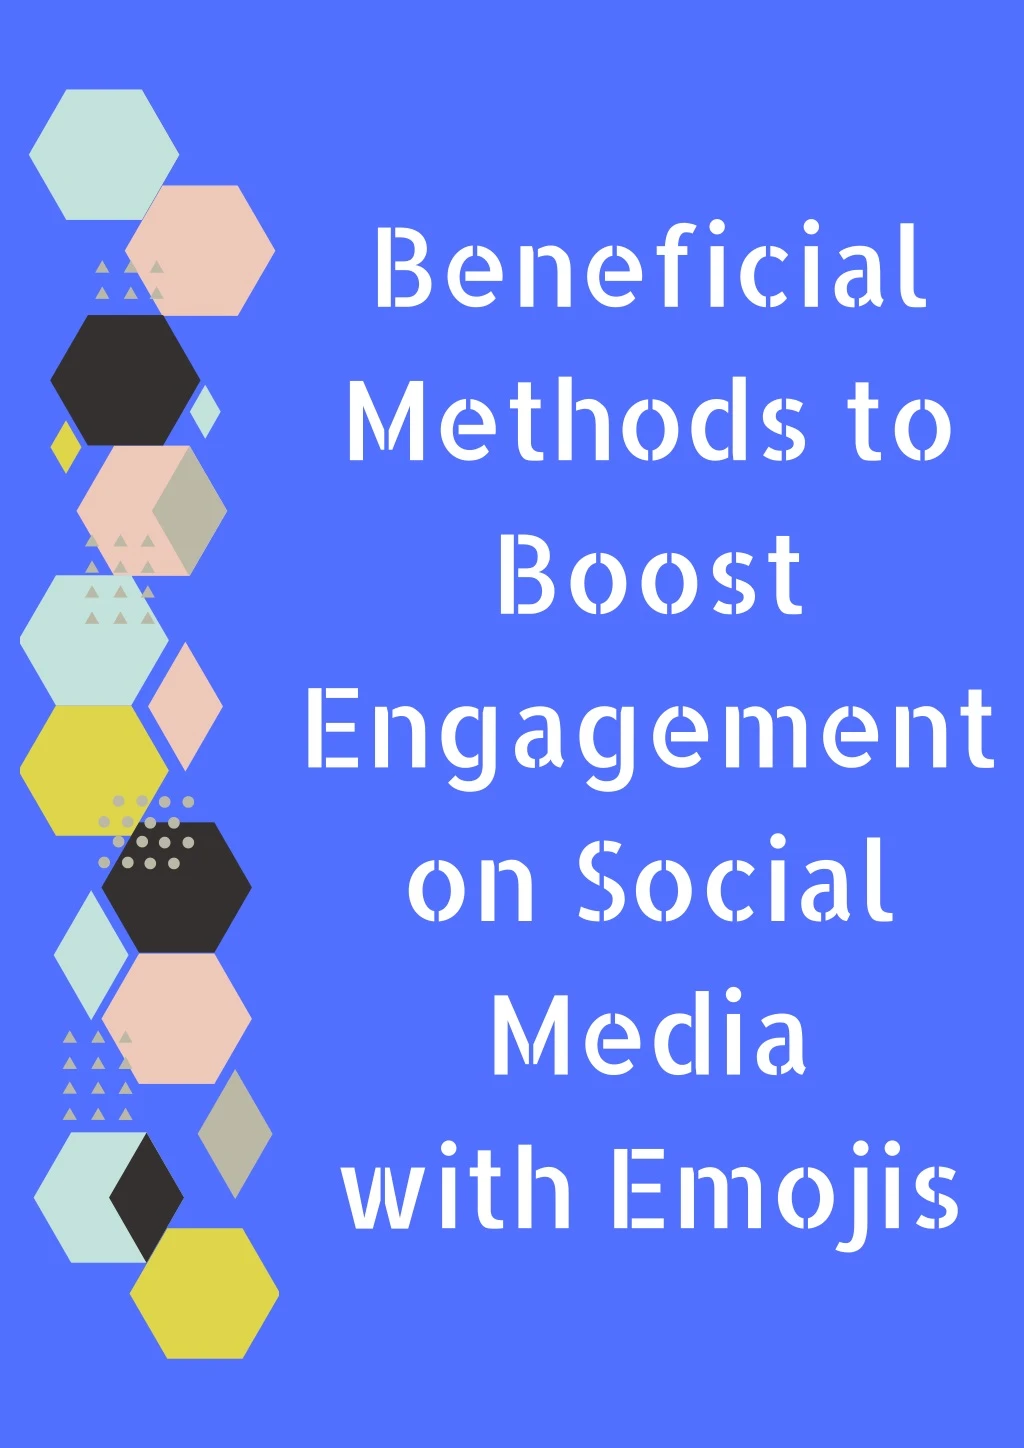 beneficial methods to boost engagement on social